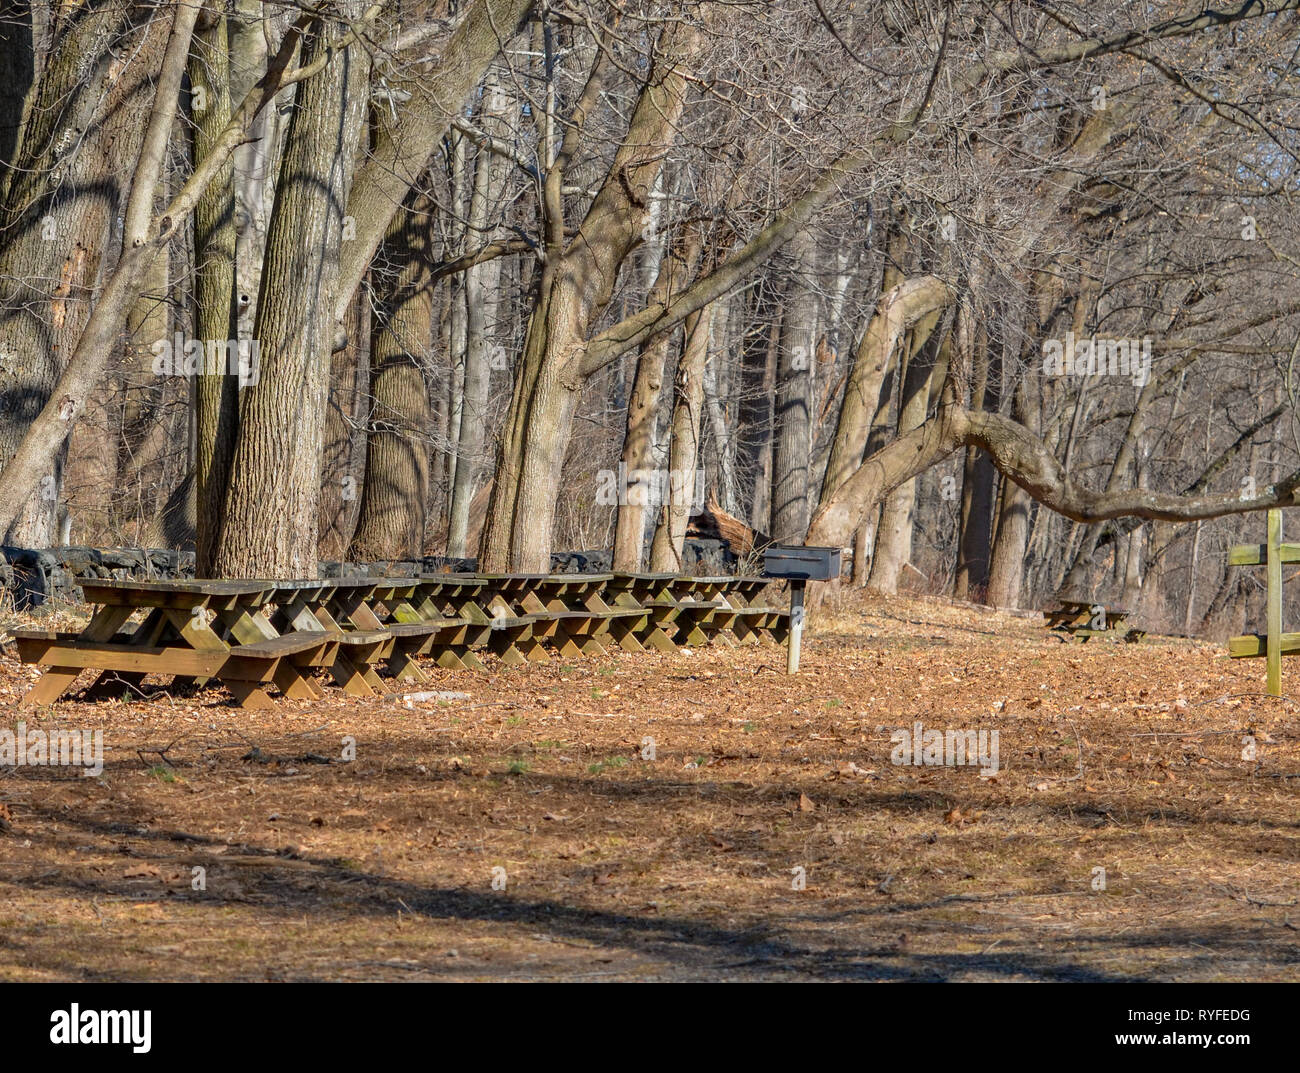 Row of picnic benches next to the tree line .. Stock Photo